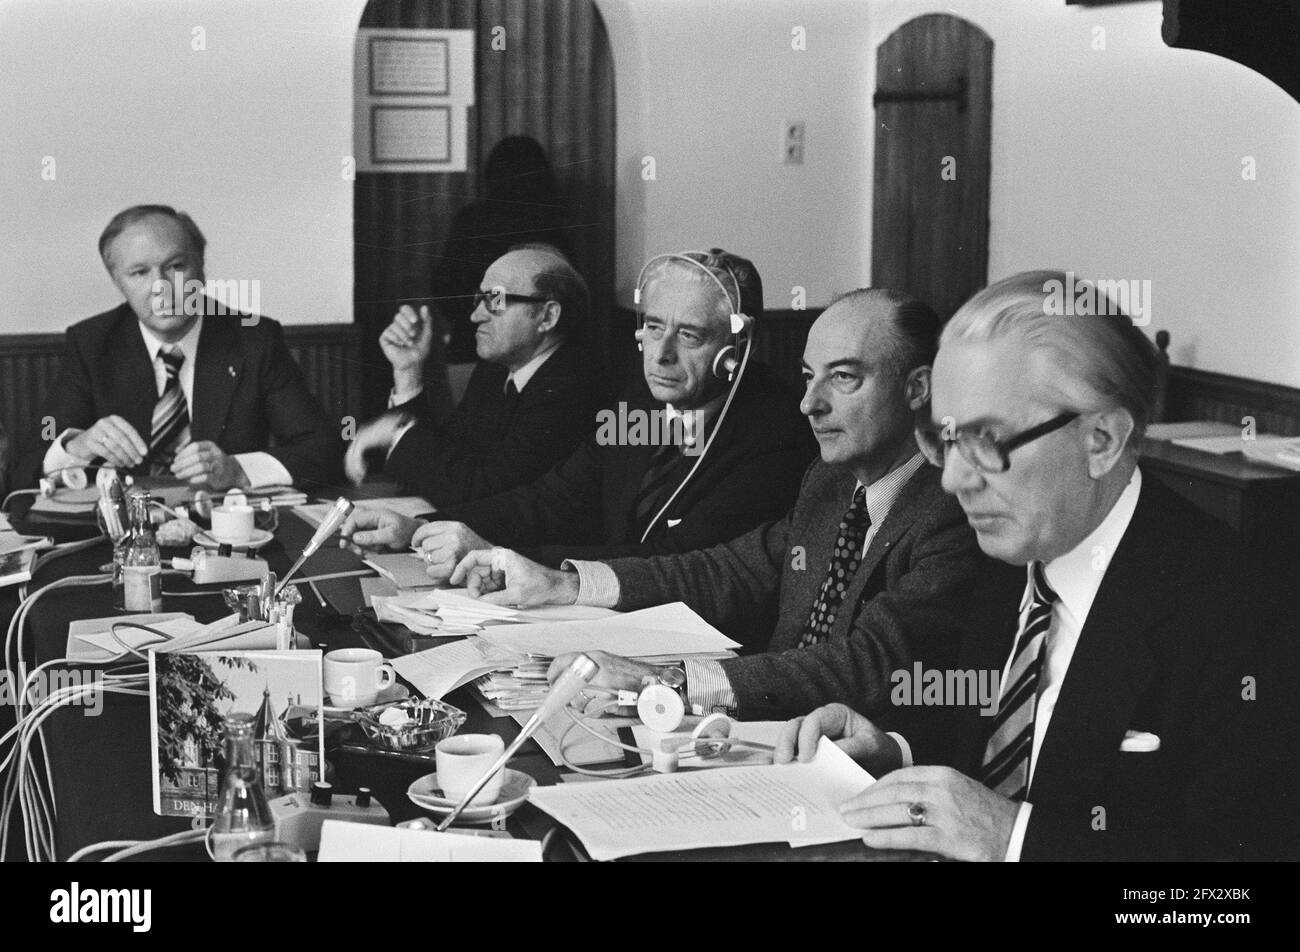 Congress European Union Christian Democrats in The Hague Kruizinga, Halm, Arnaldo Forlani, Schmelzer, Van Hassel and Mario Sanchez, February 14, 1975, congresses, The Netherlands, 20th century press agency photo, news to remember, documentary, historic photography 1945-1990, visual stories, human history of the Twentieth Century, capturing moments in time Stock Photo